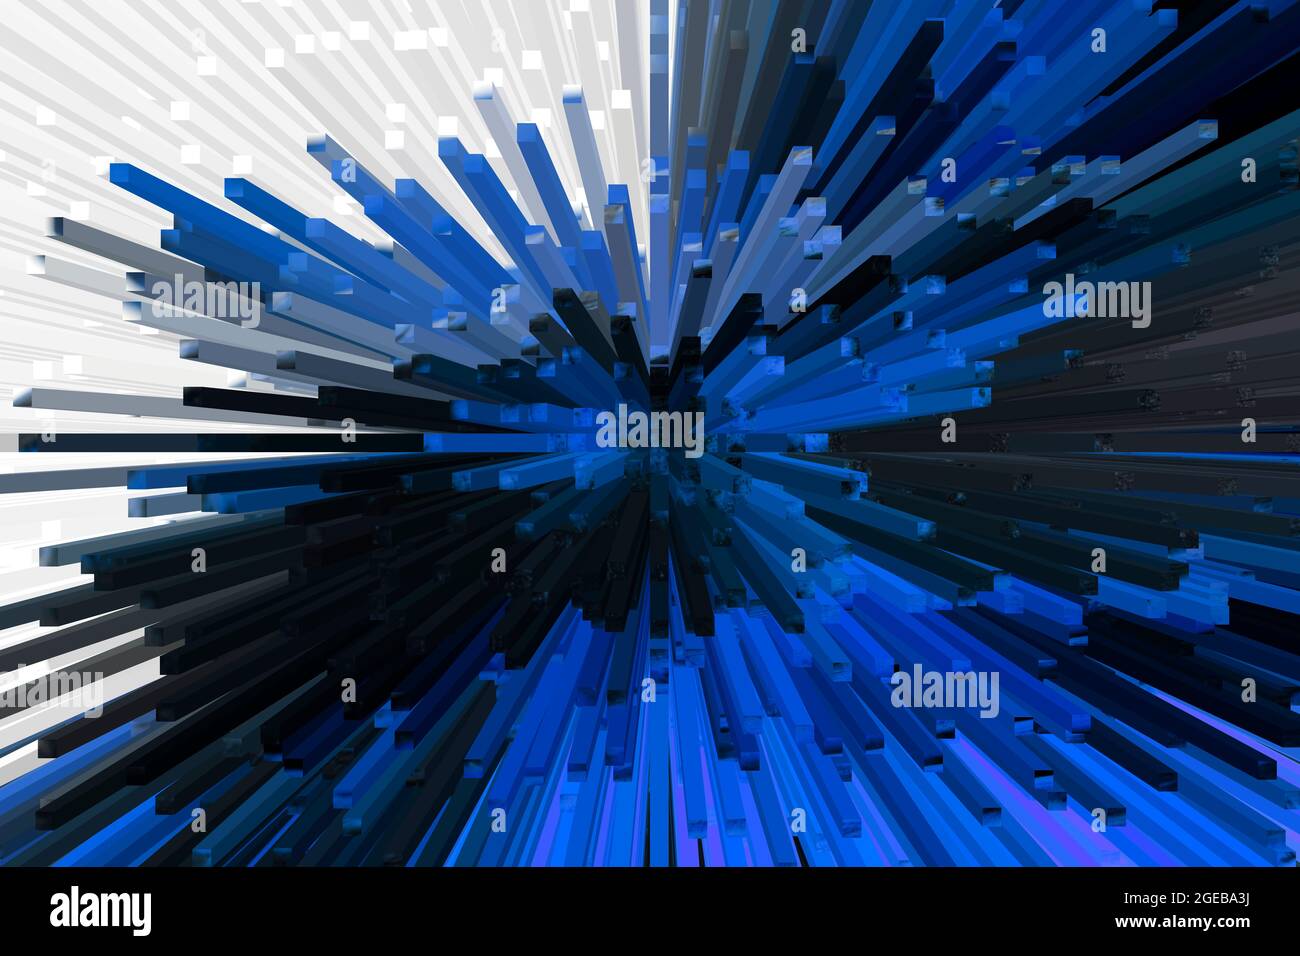 Abstract Dark Blue 3D Extrude Effect Background Design Stock Photo